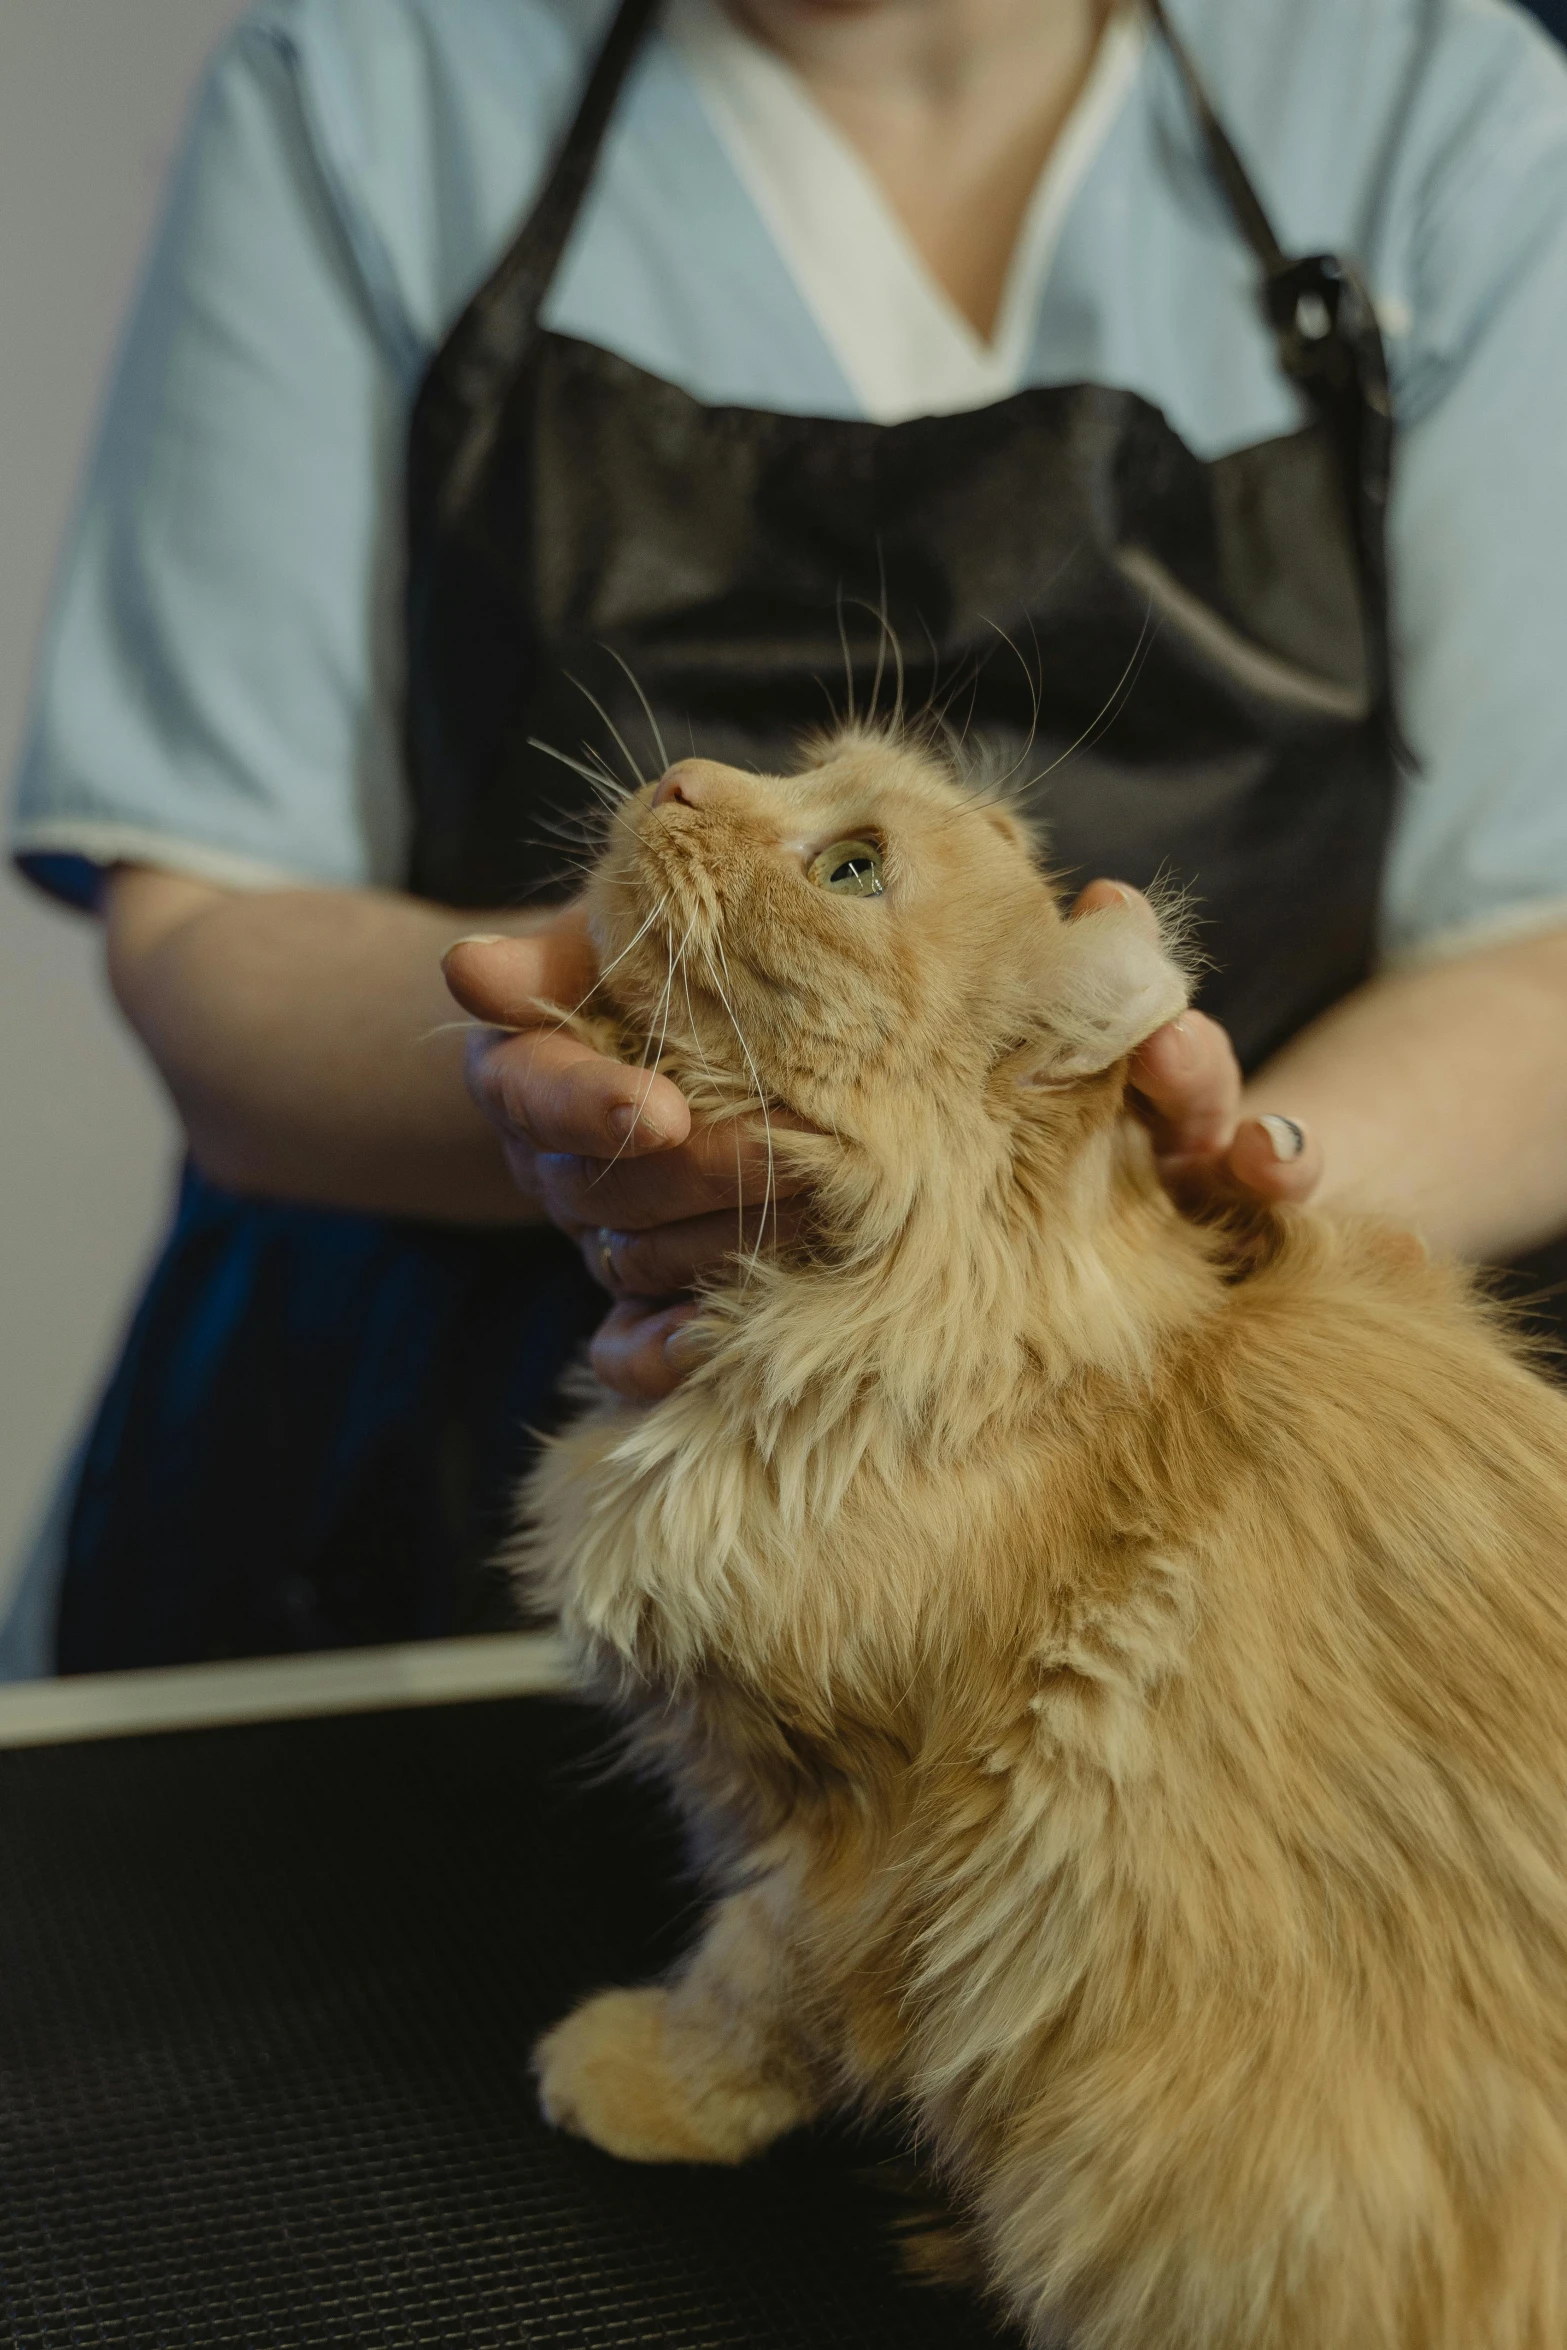 a close up of a person petting a cat, moulting, curls on top of his head, staff, ready to model